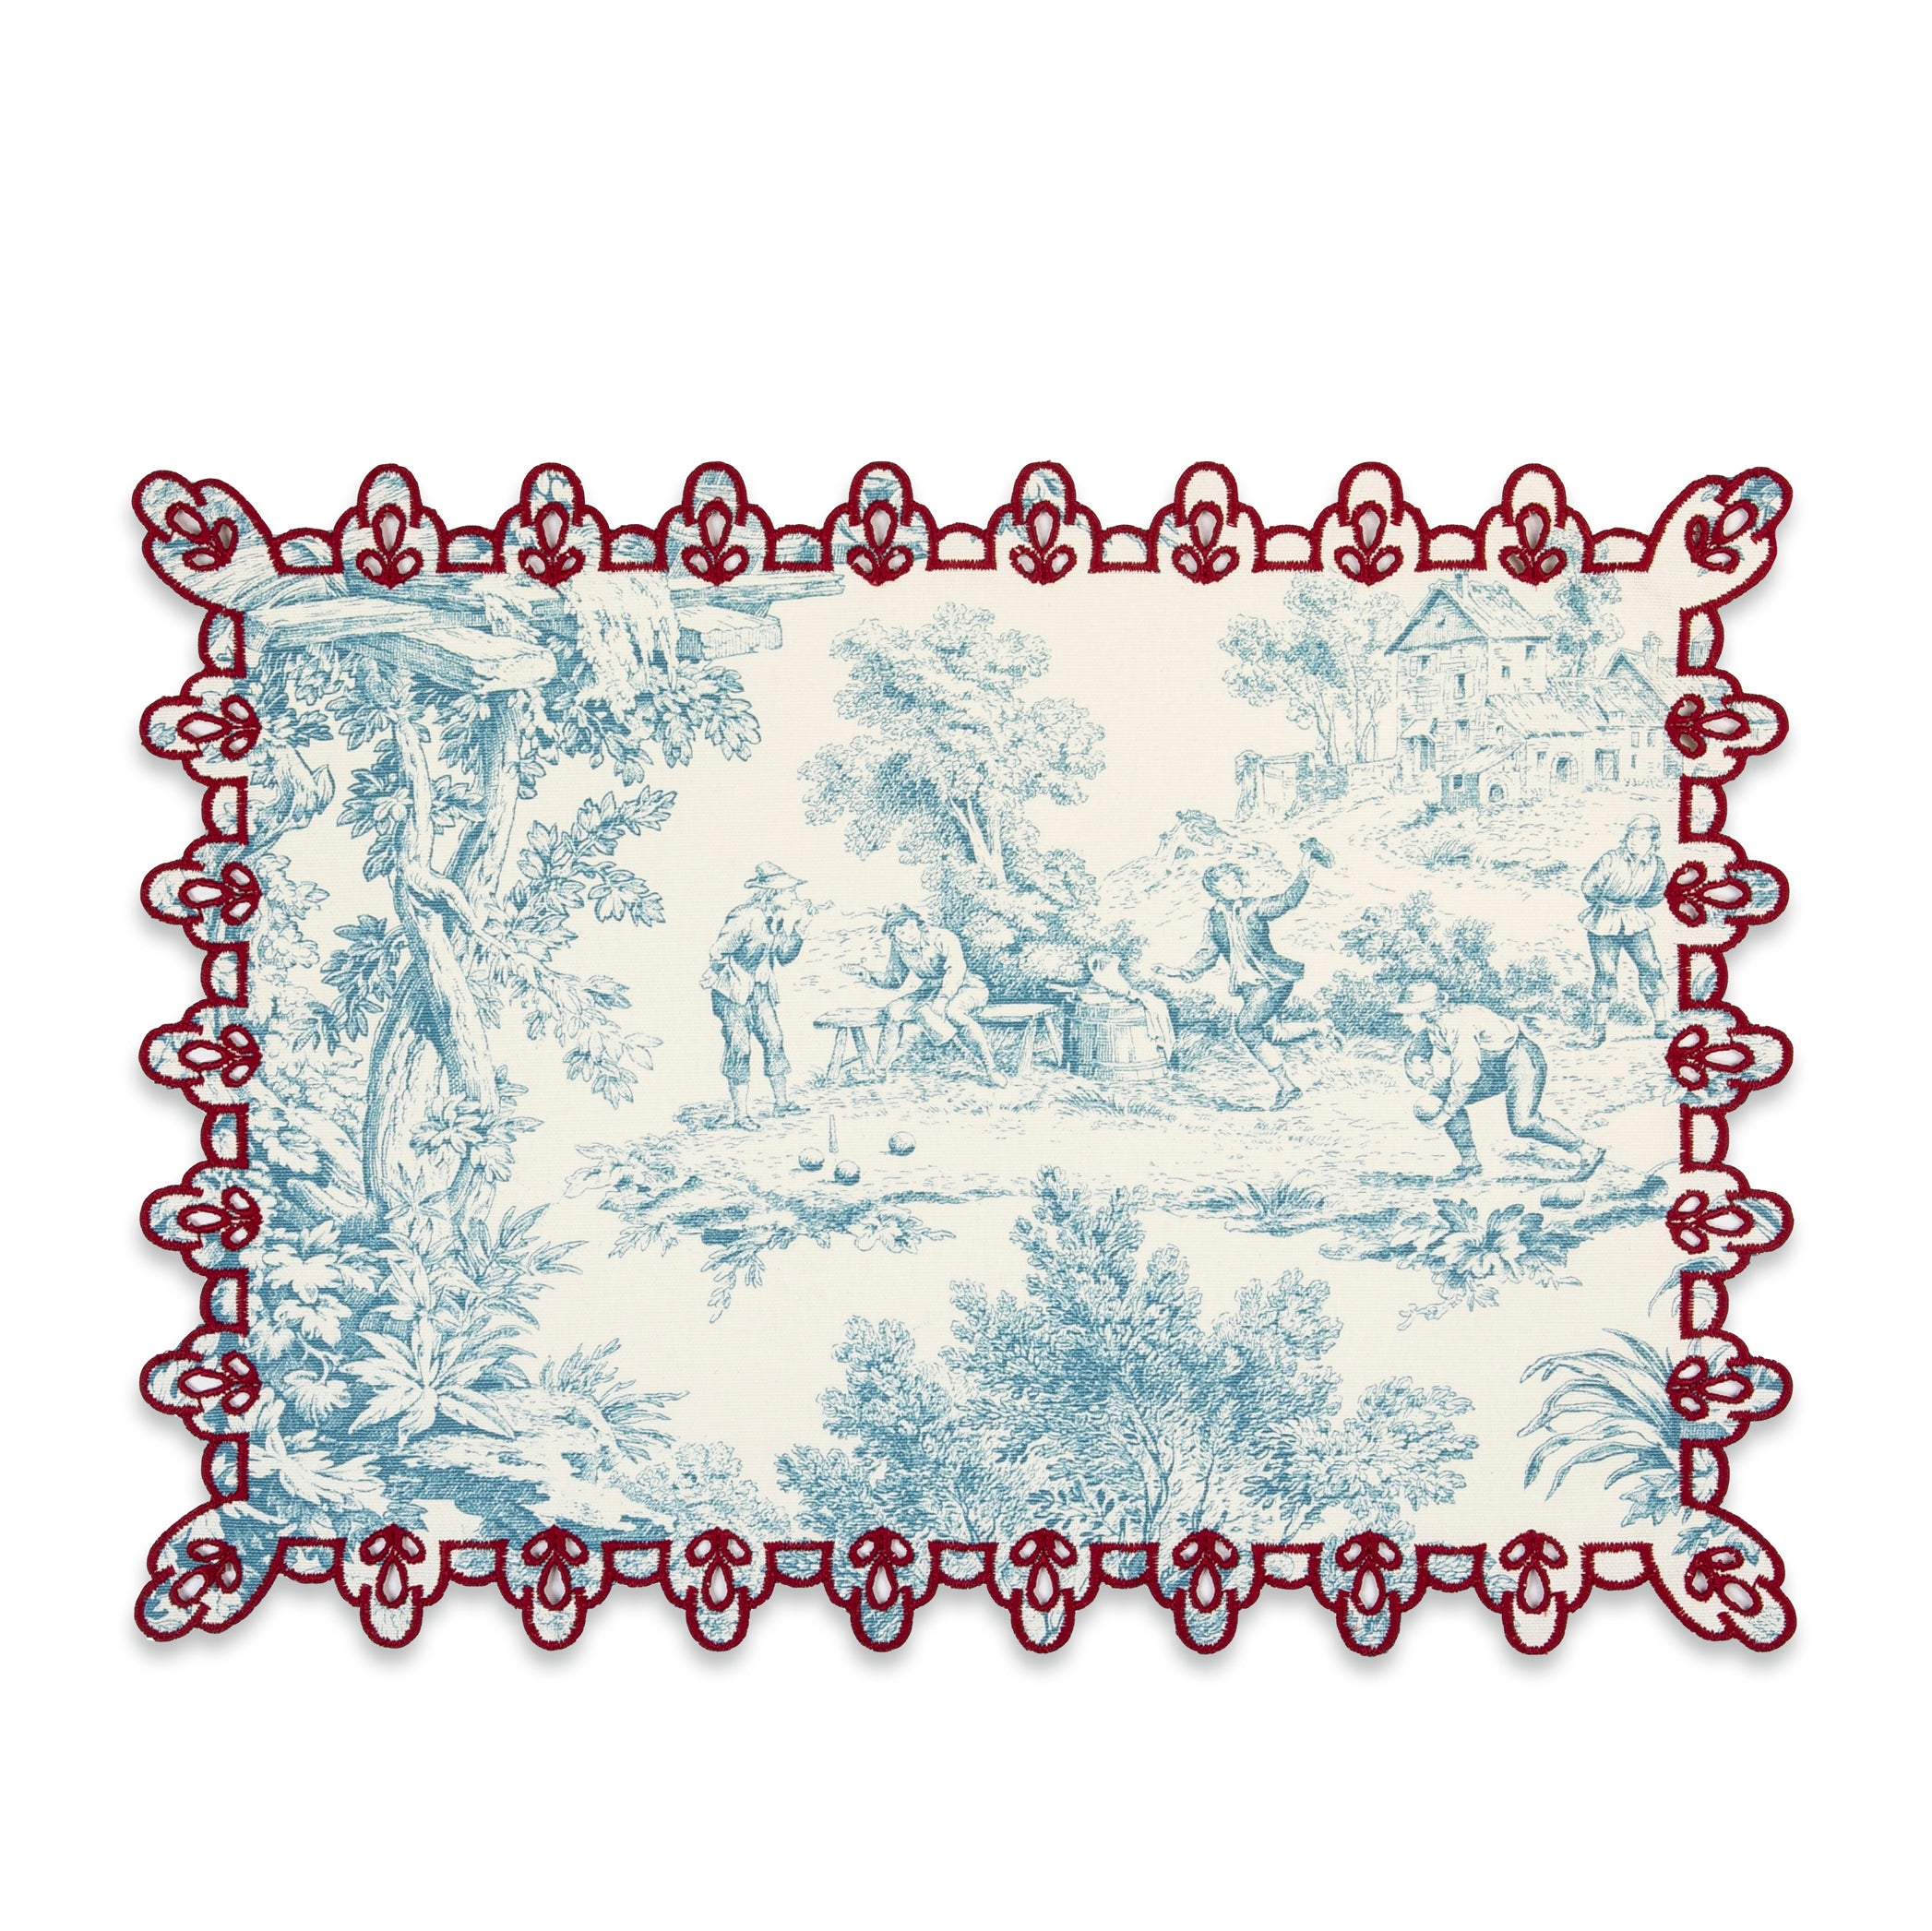 Toile Stain Resistant Cotton Placemat in Blue and Red, 50x35cm